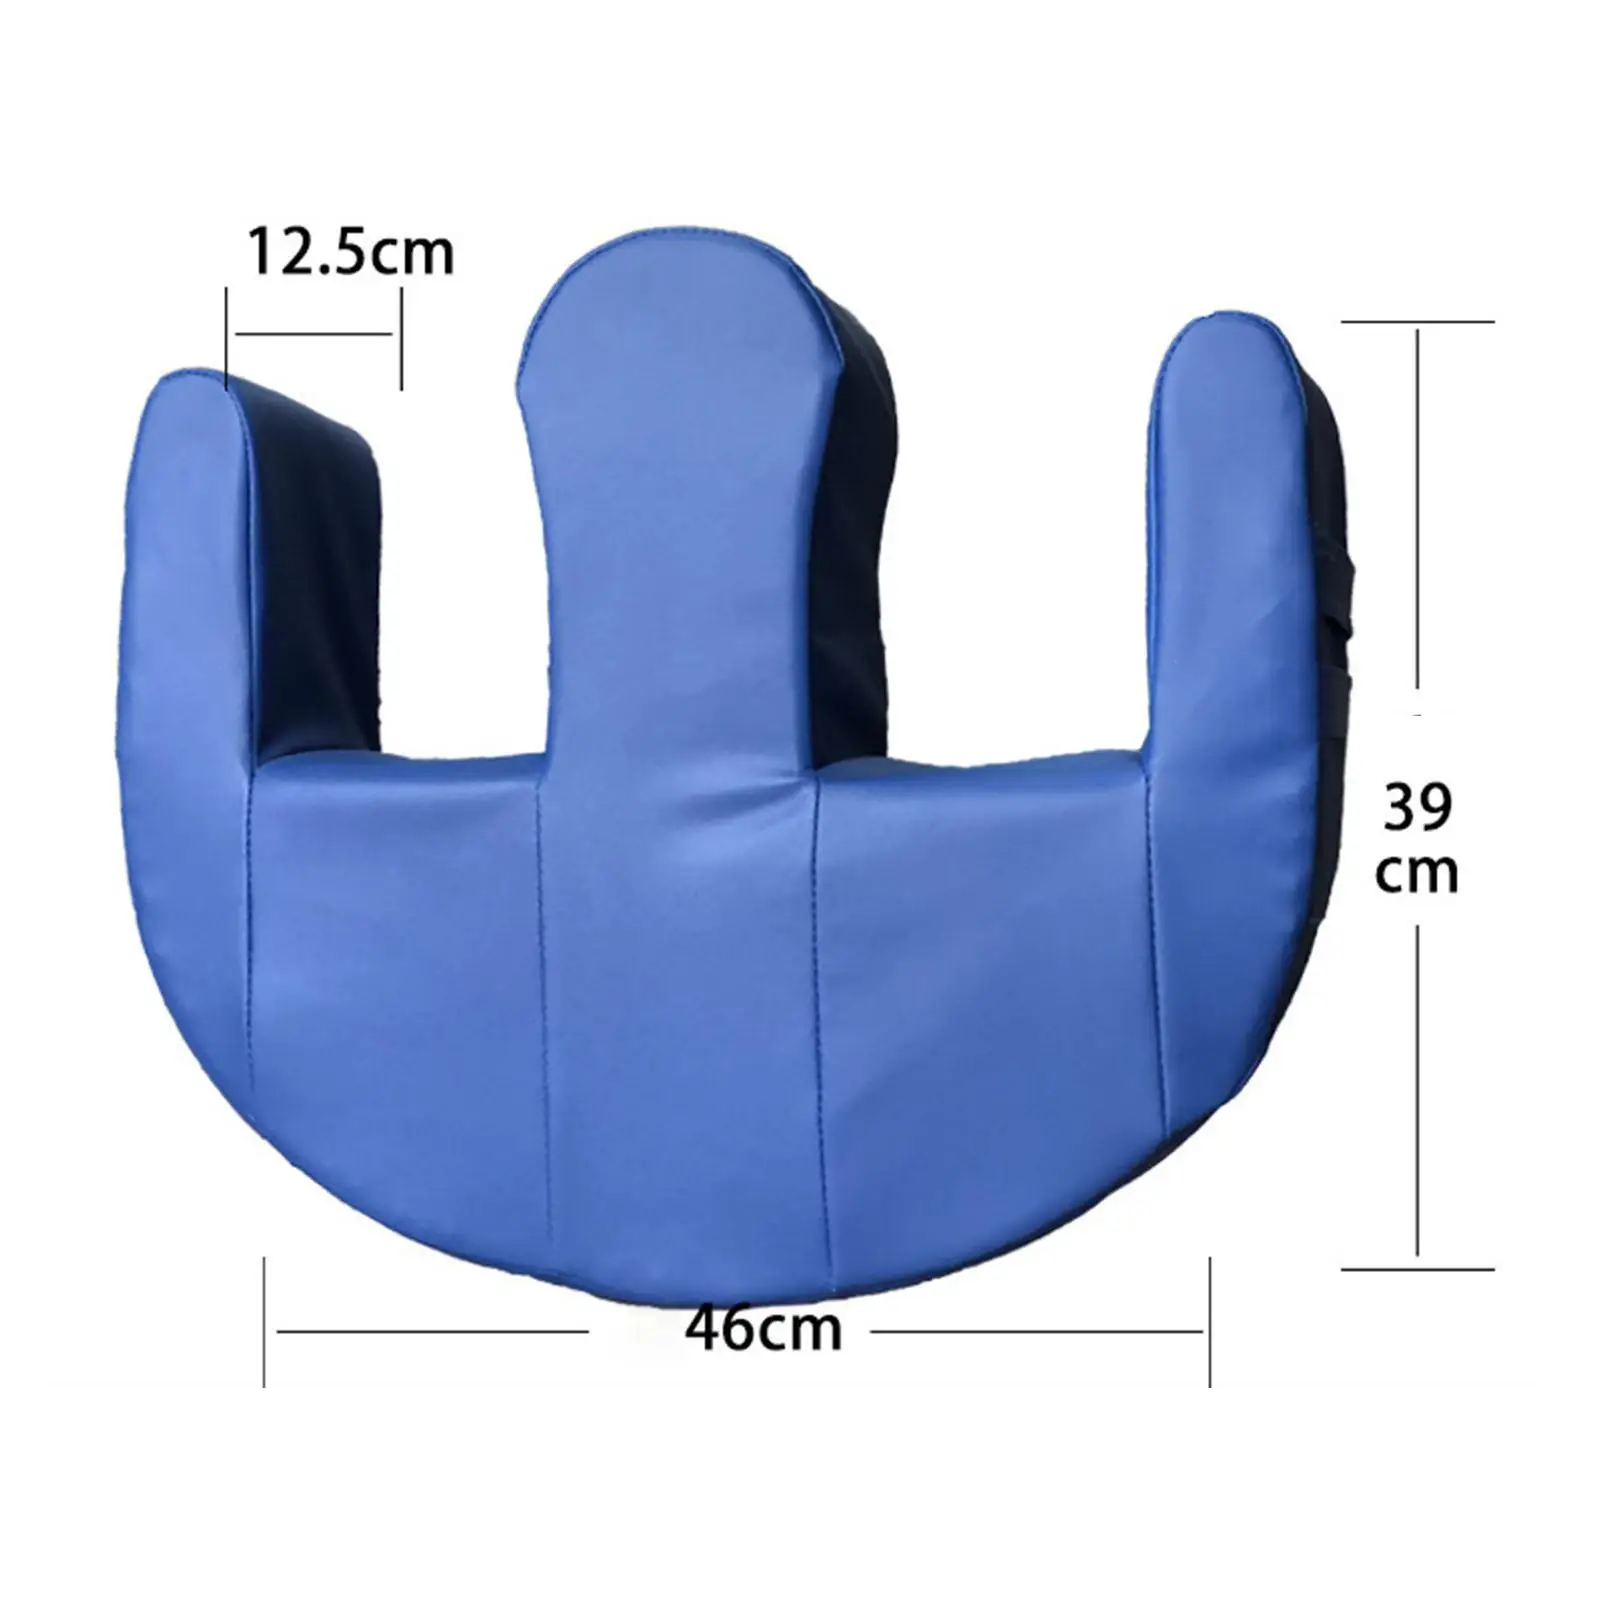 Waterproof Bed Turn Over Aid U-Shaped Pillow Comfort for People Disabled Multifunctional Elderly Turnover Device Pad Bed